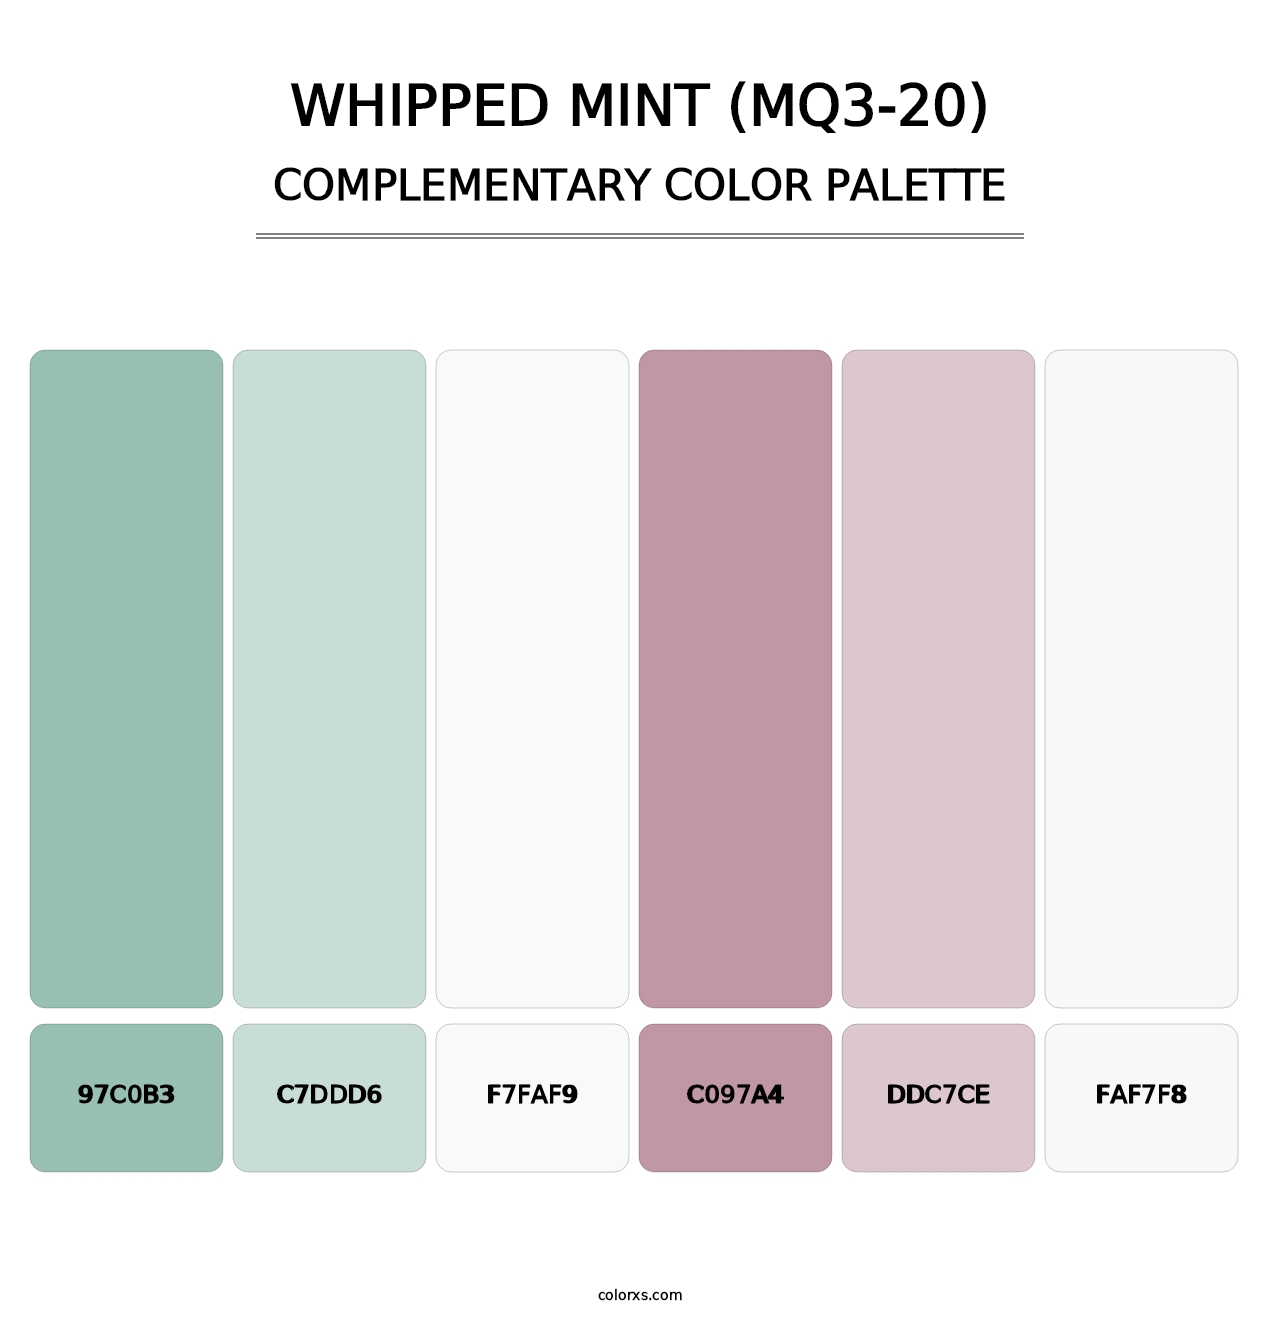 Whipped Mint (MQ3-20) - Complementary Color Palette